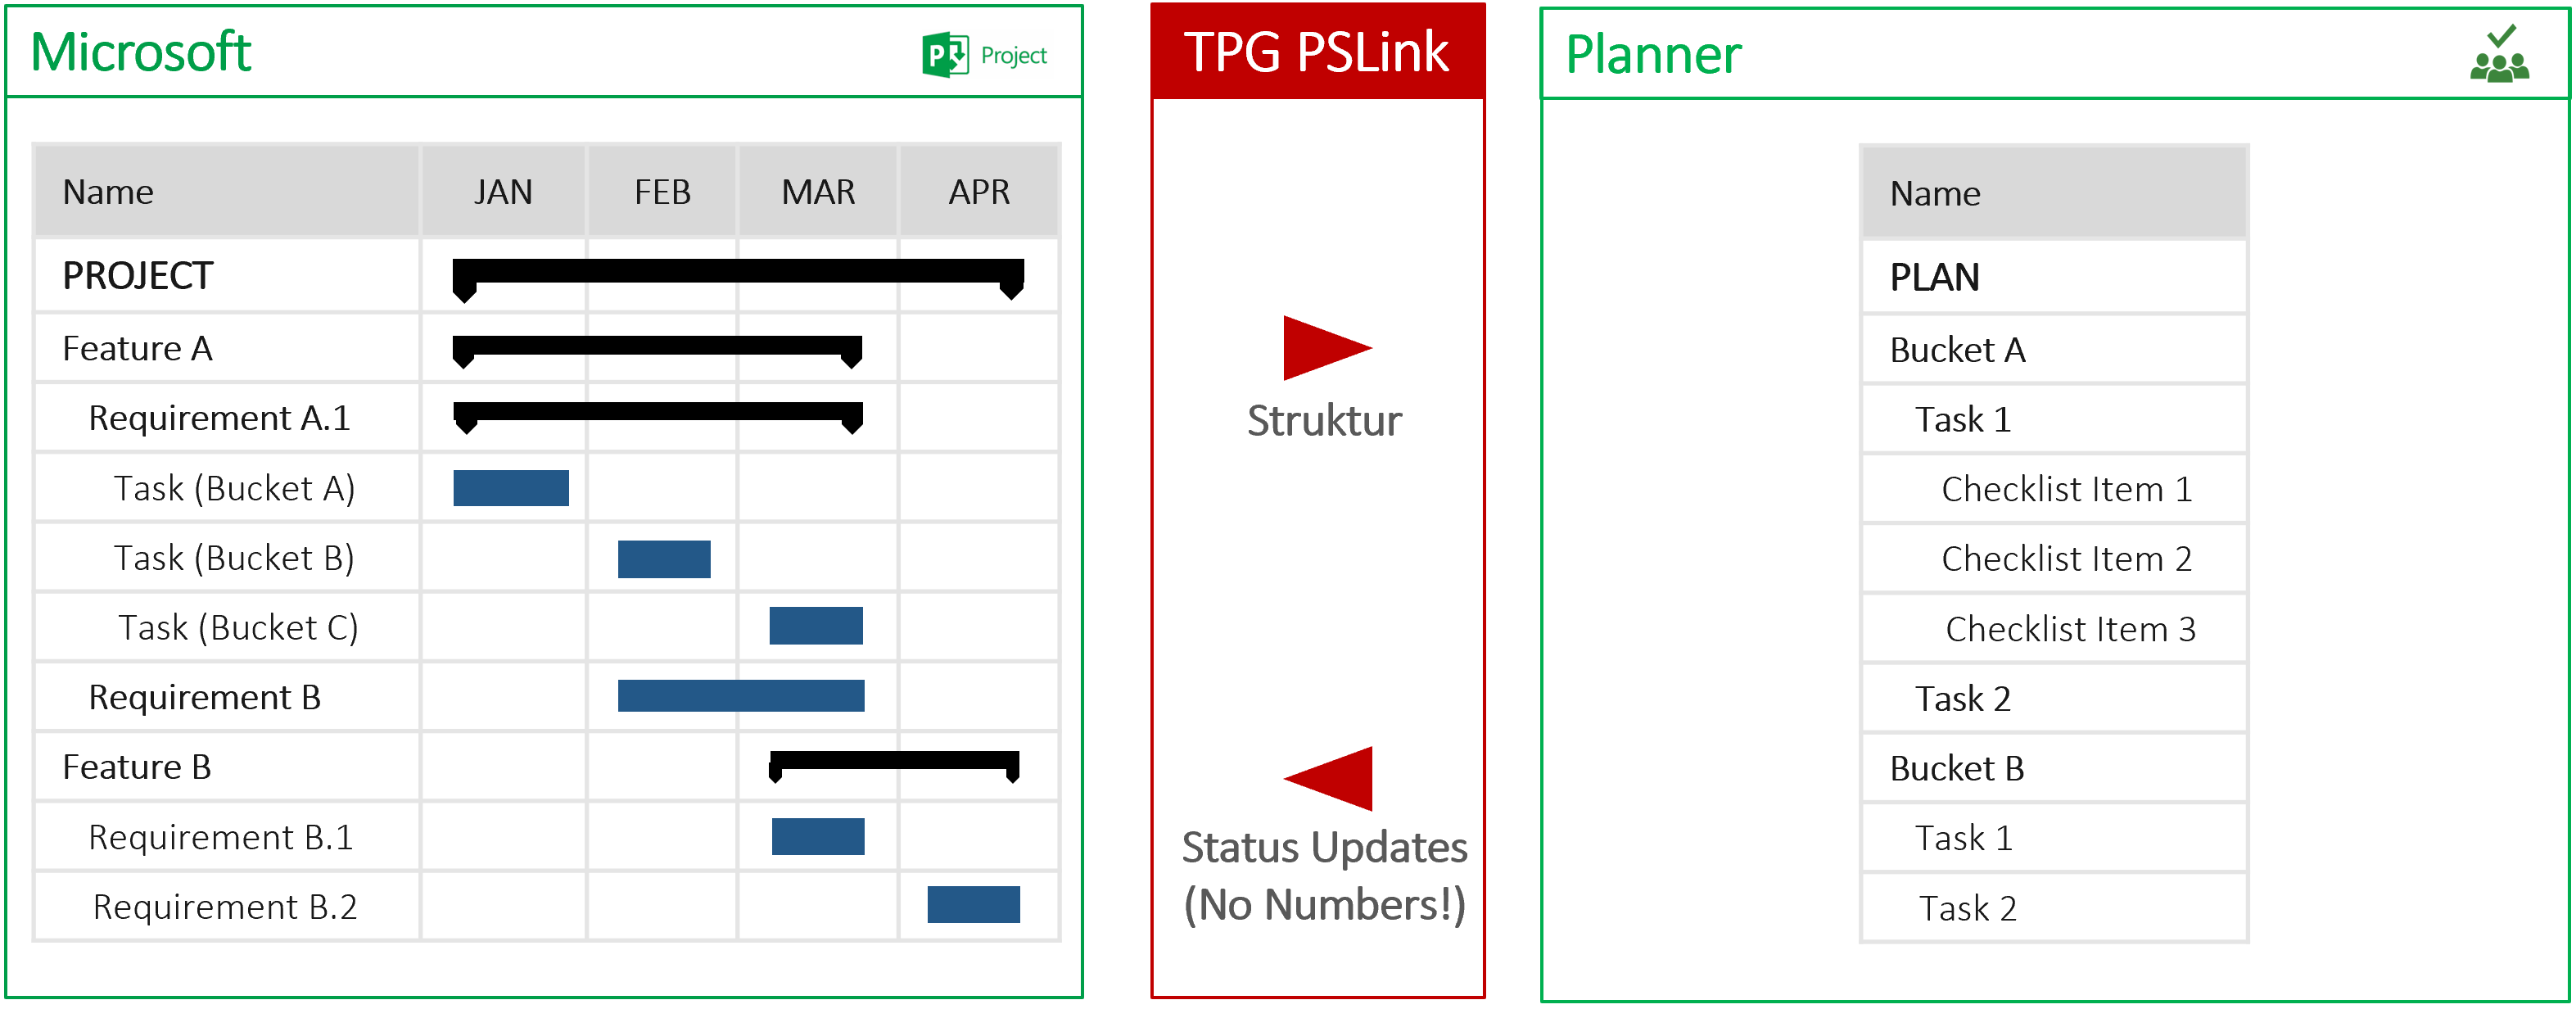 Synchronizing buckets and tasks between MS Project and Planner